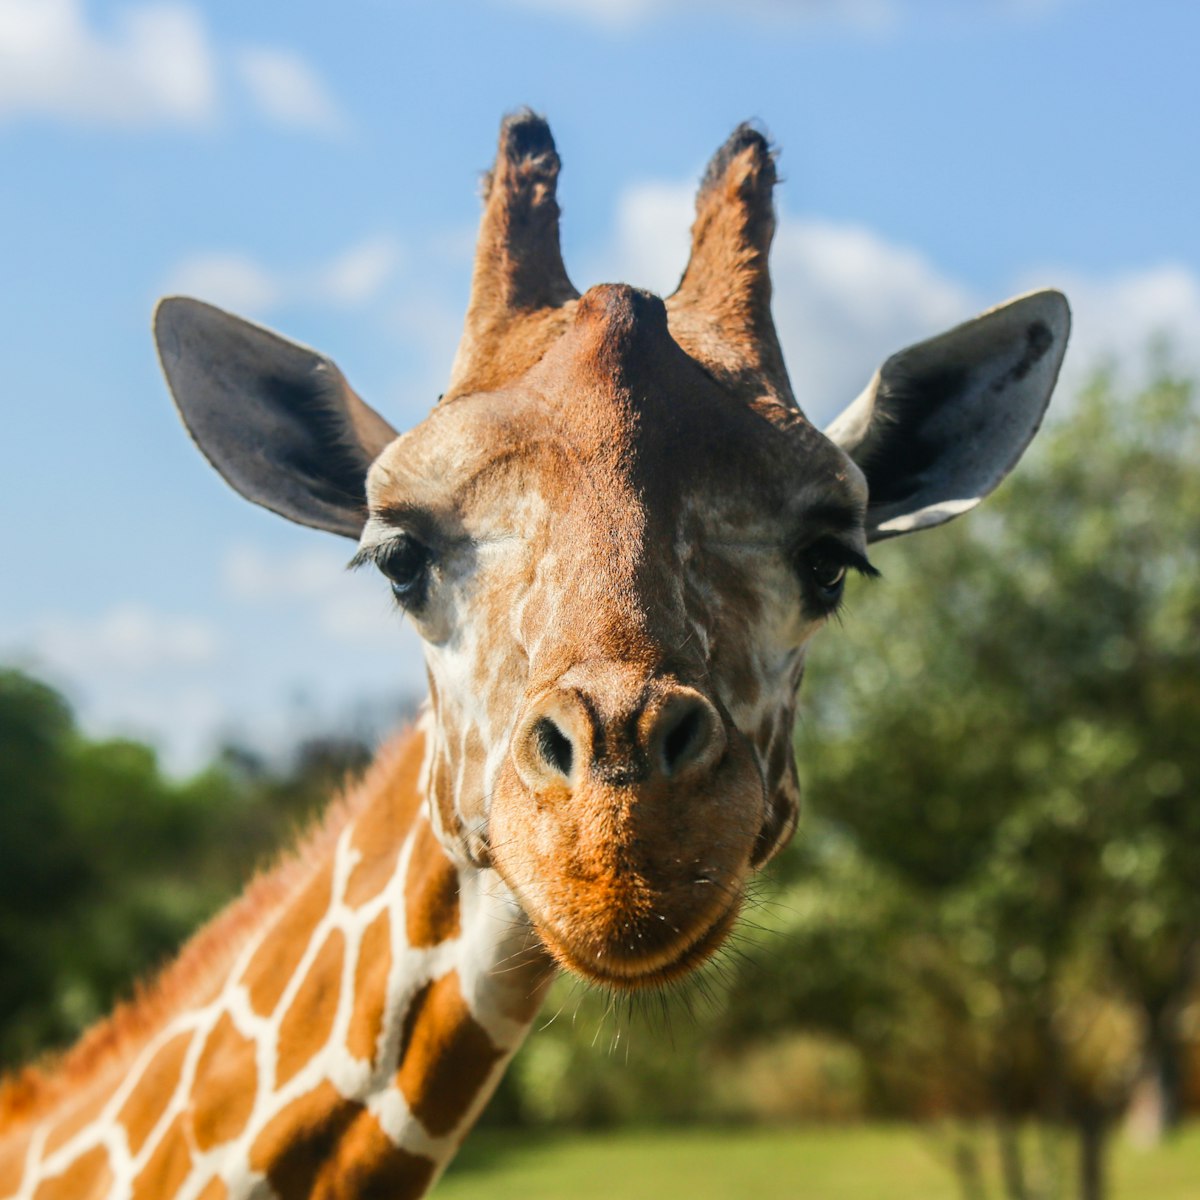 Portrait of a giraffe close-up, photographed in Florida; Shutterstock ID 624202532; Your name (First / Last): Trisha Ping; GL account no.: 65050; Netsuite department name: Online Editorial; Full Product or Project name including edition: Trisha Ping/65050/Online Editorial/Florida